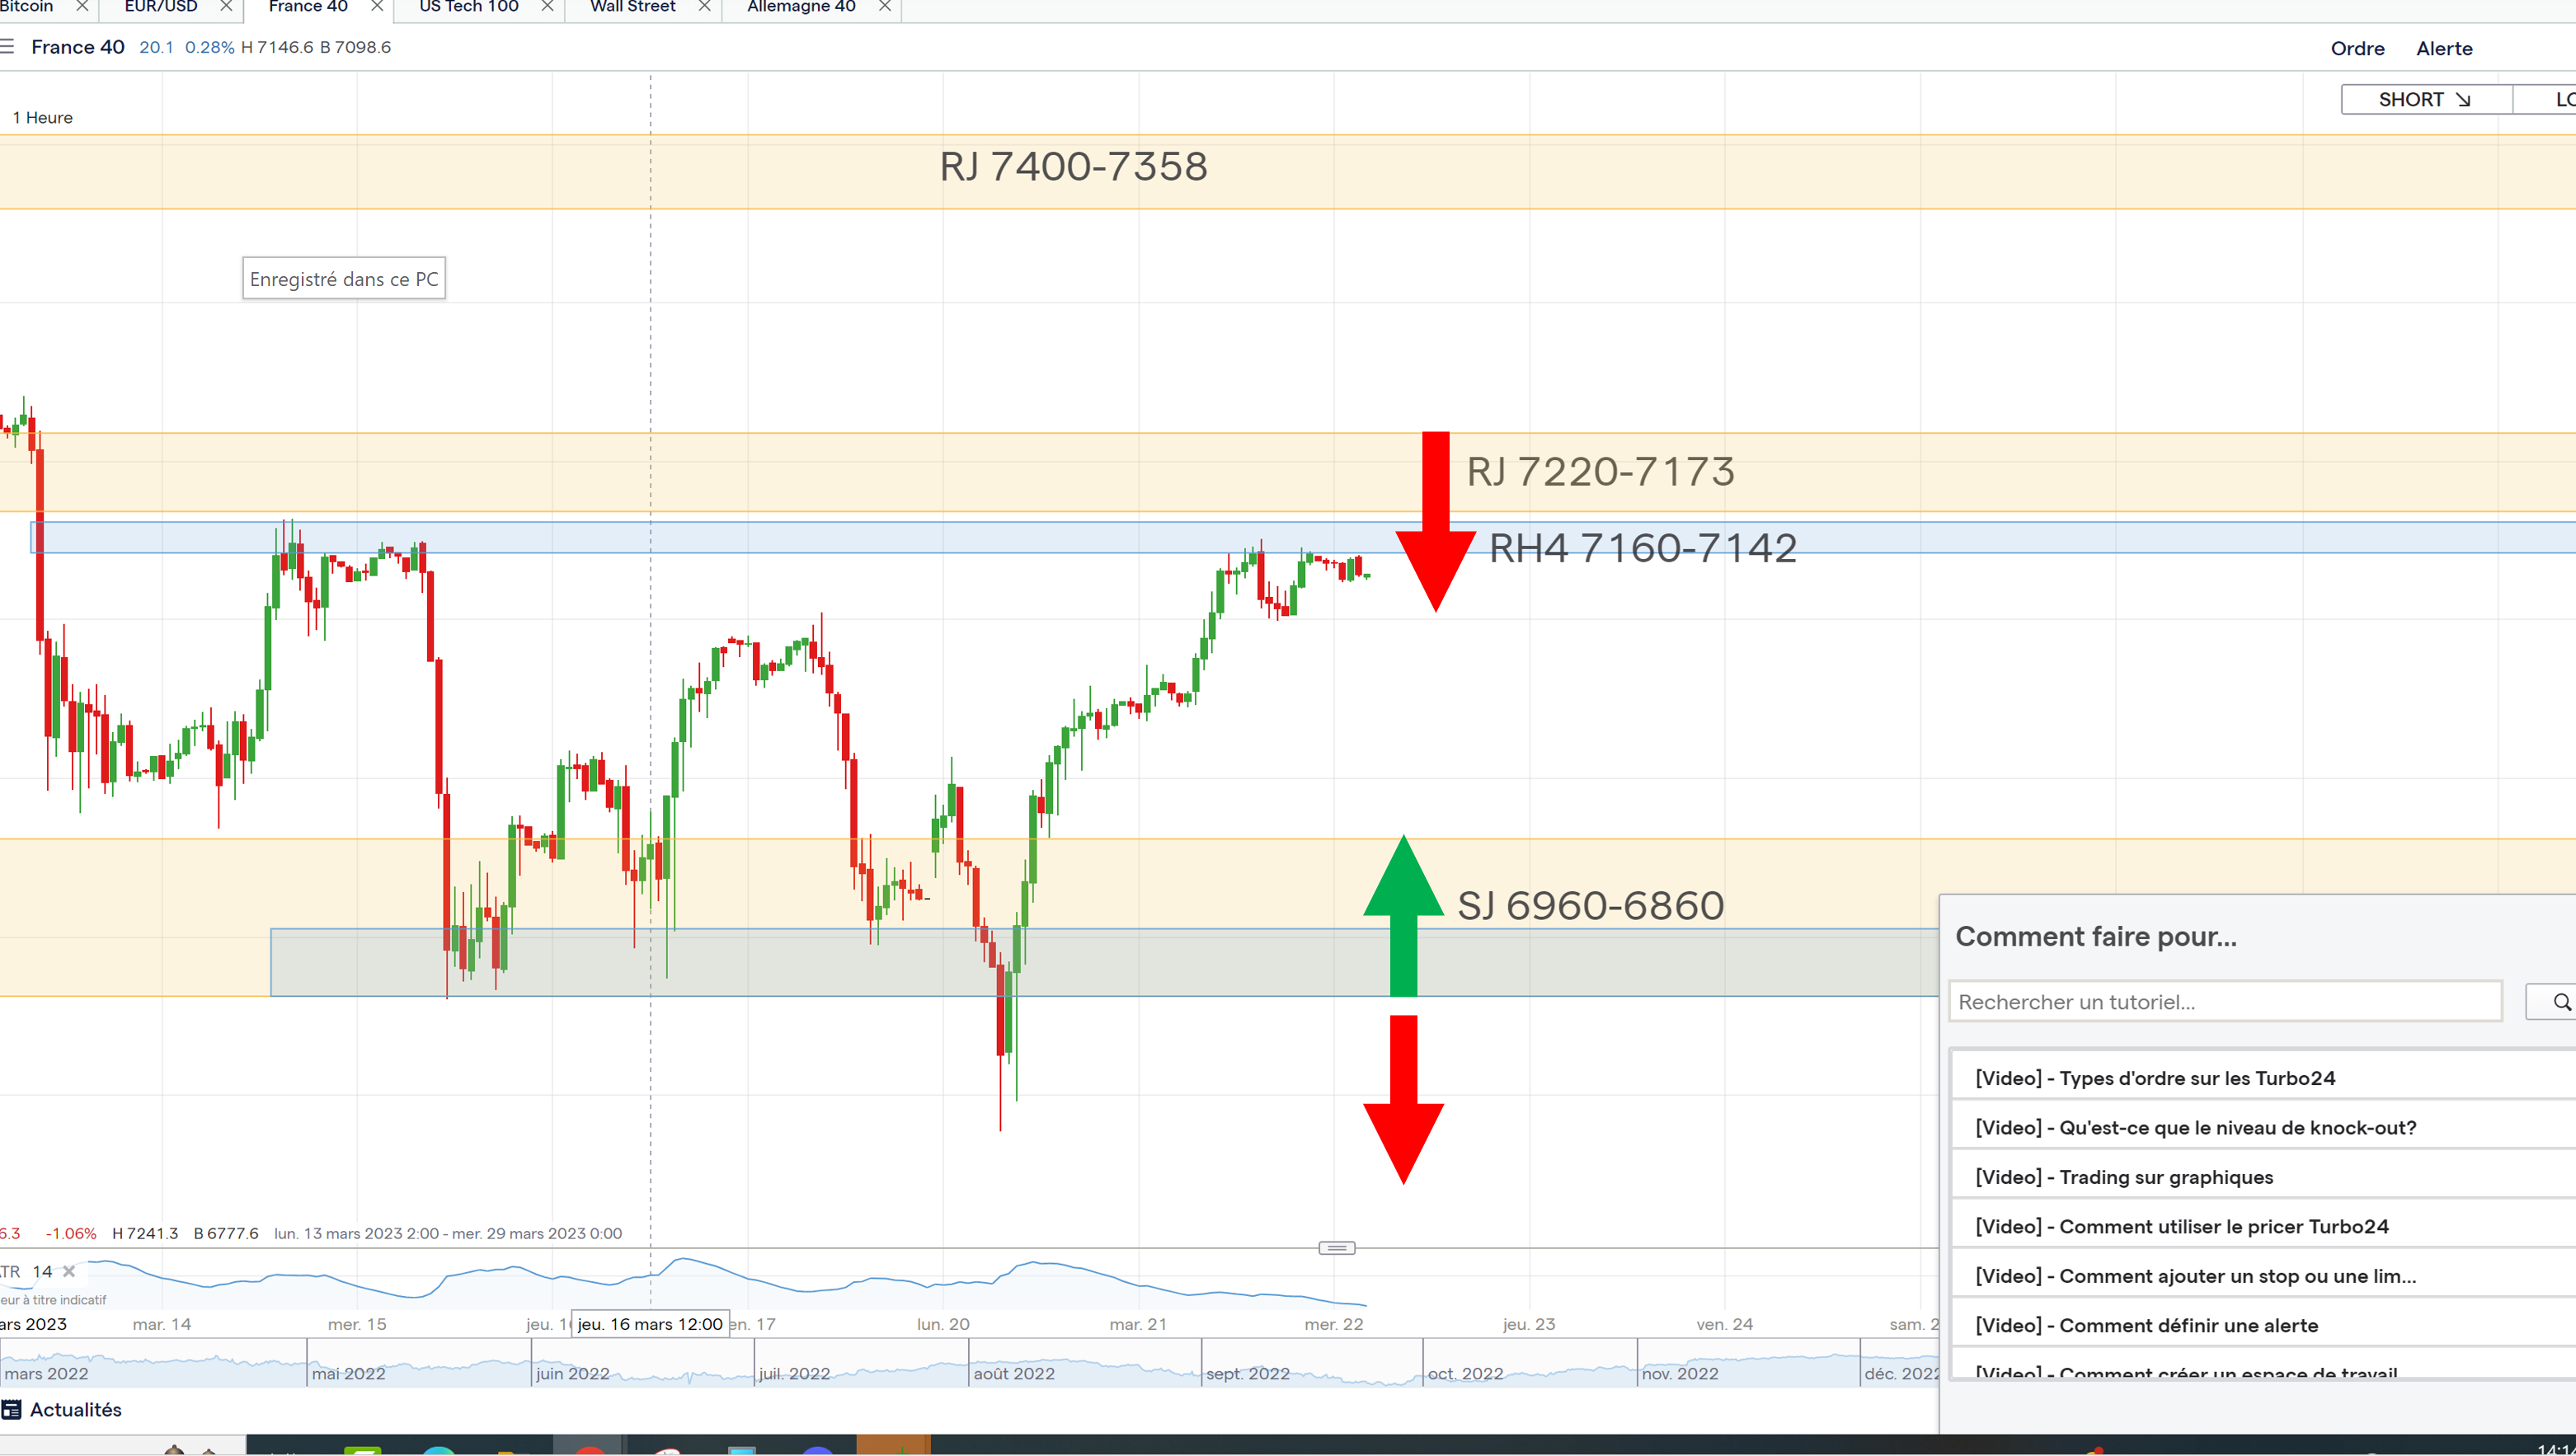 Trading cac40 22/03/23